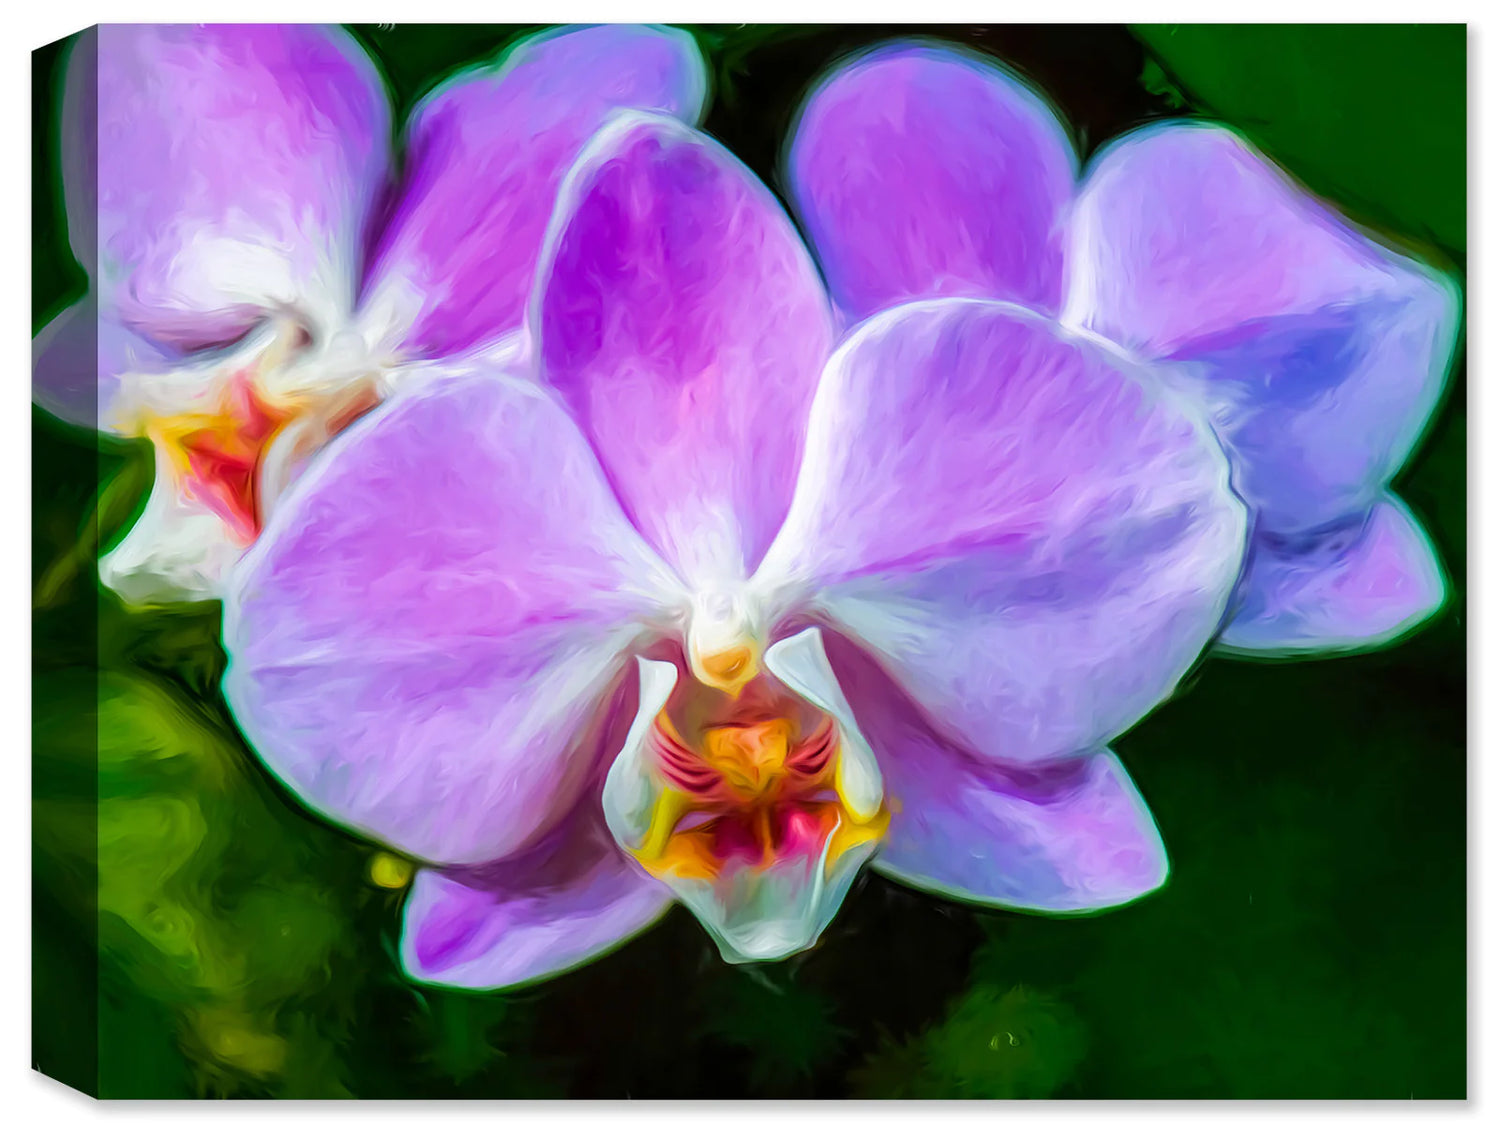 Photograph of a Purple Orchid